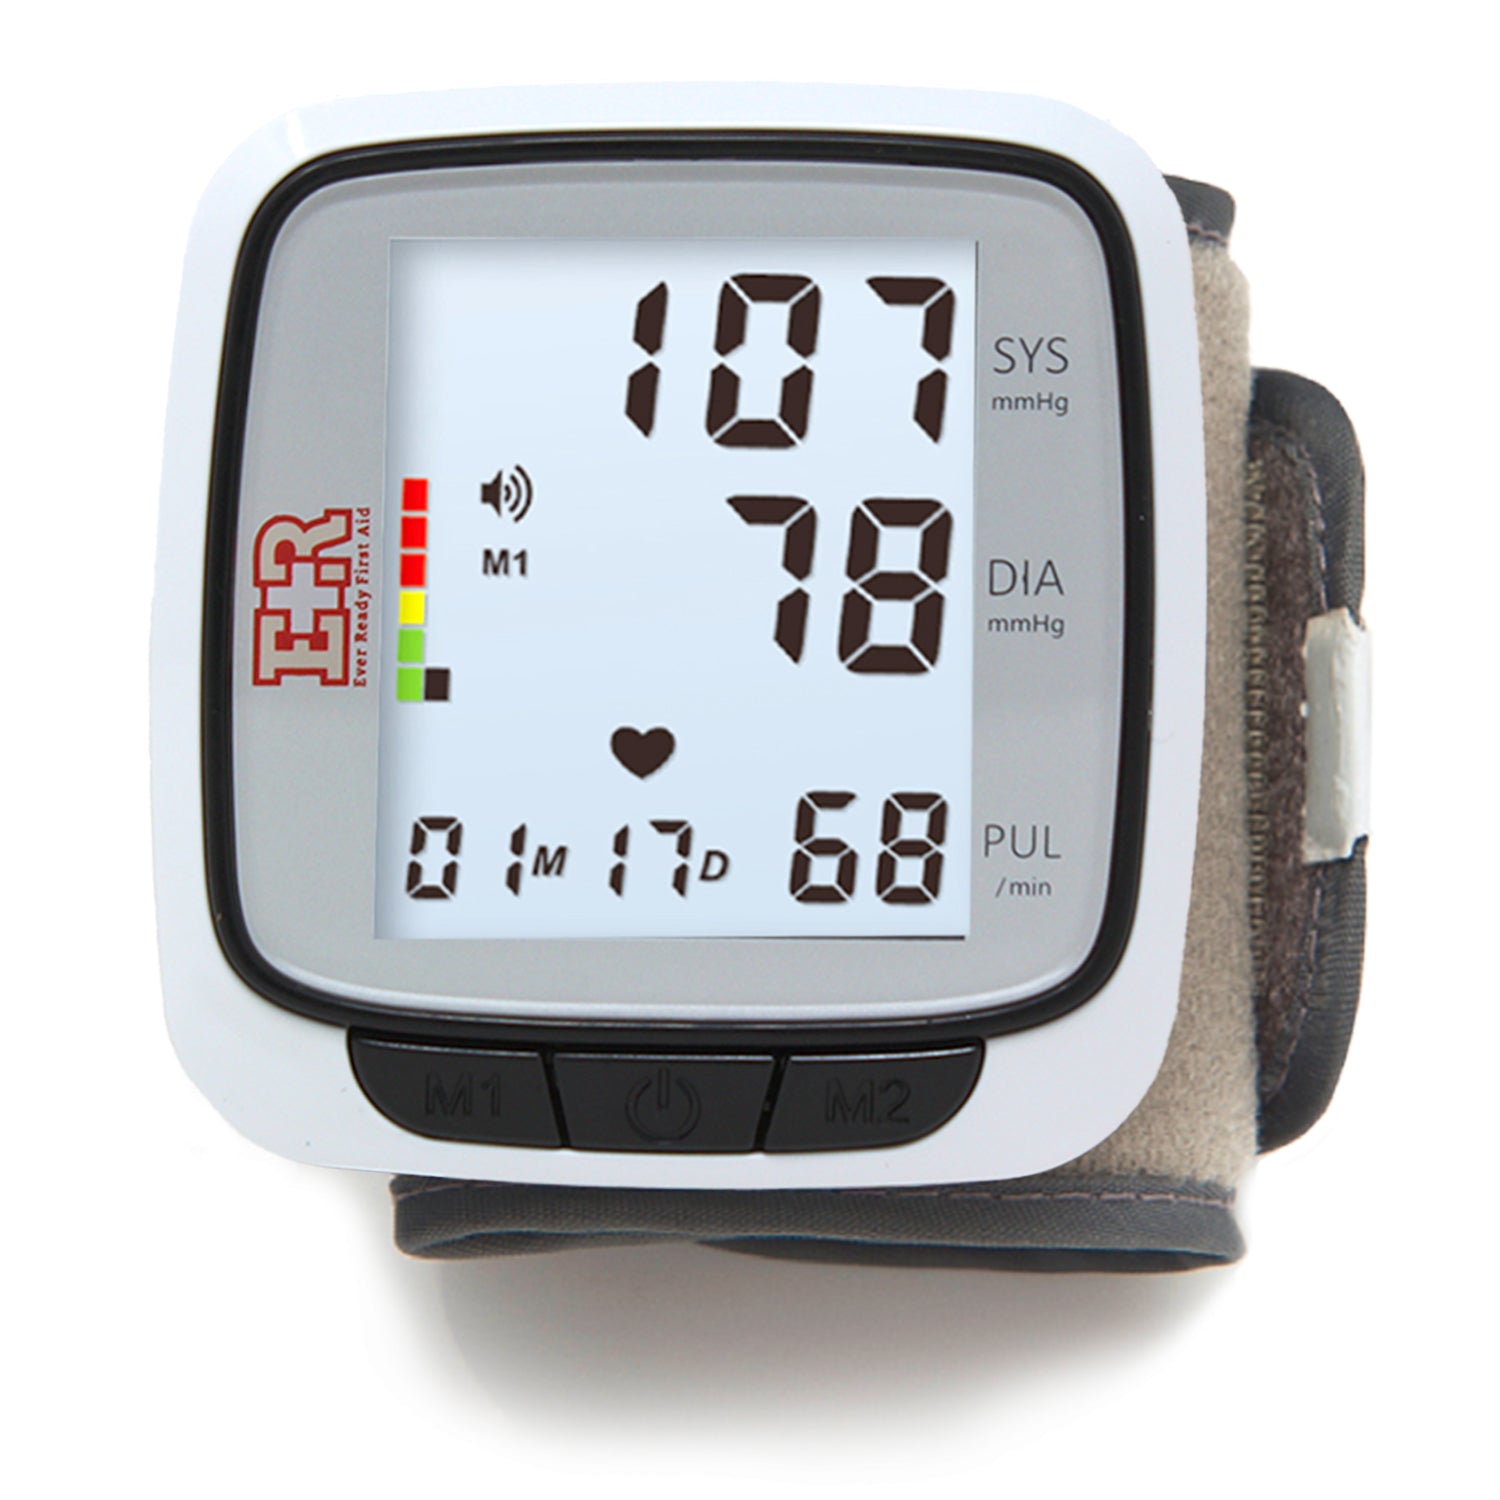 New Wrist Blood Pressure Monitor with Speaker, Blood Pressure Machine Has a  Large LCD Display Touch Screen, Digital Automatic Blood Pressure Cuff Wrist  Rechargeable, and Easy One-Touch Operation 